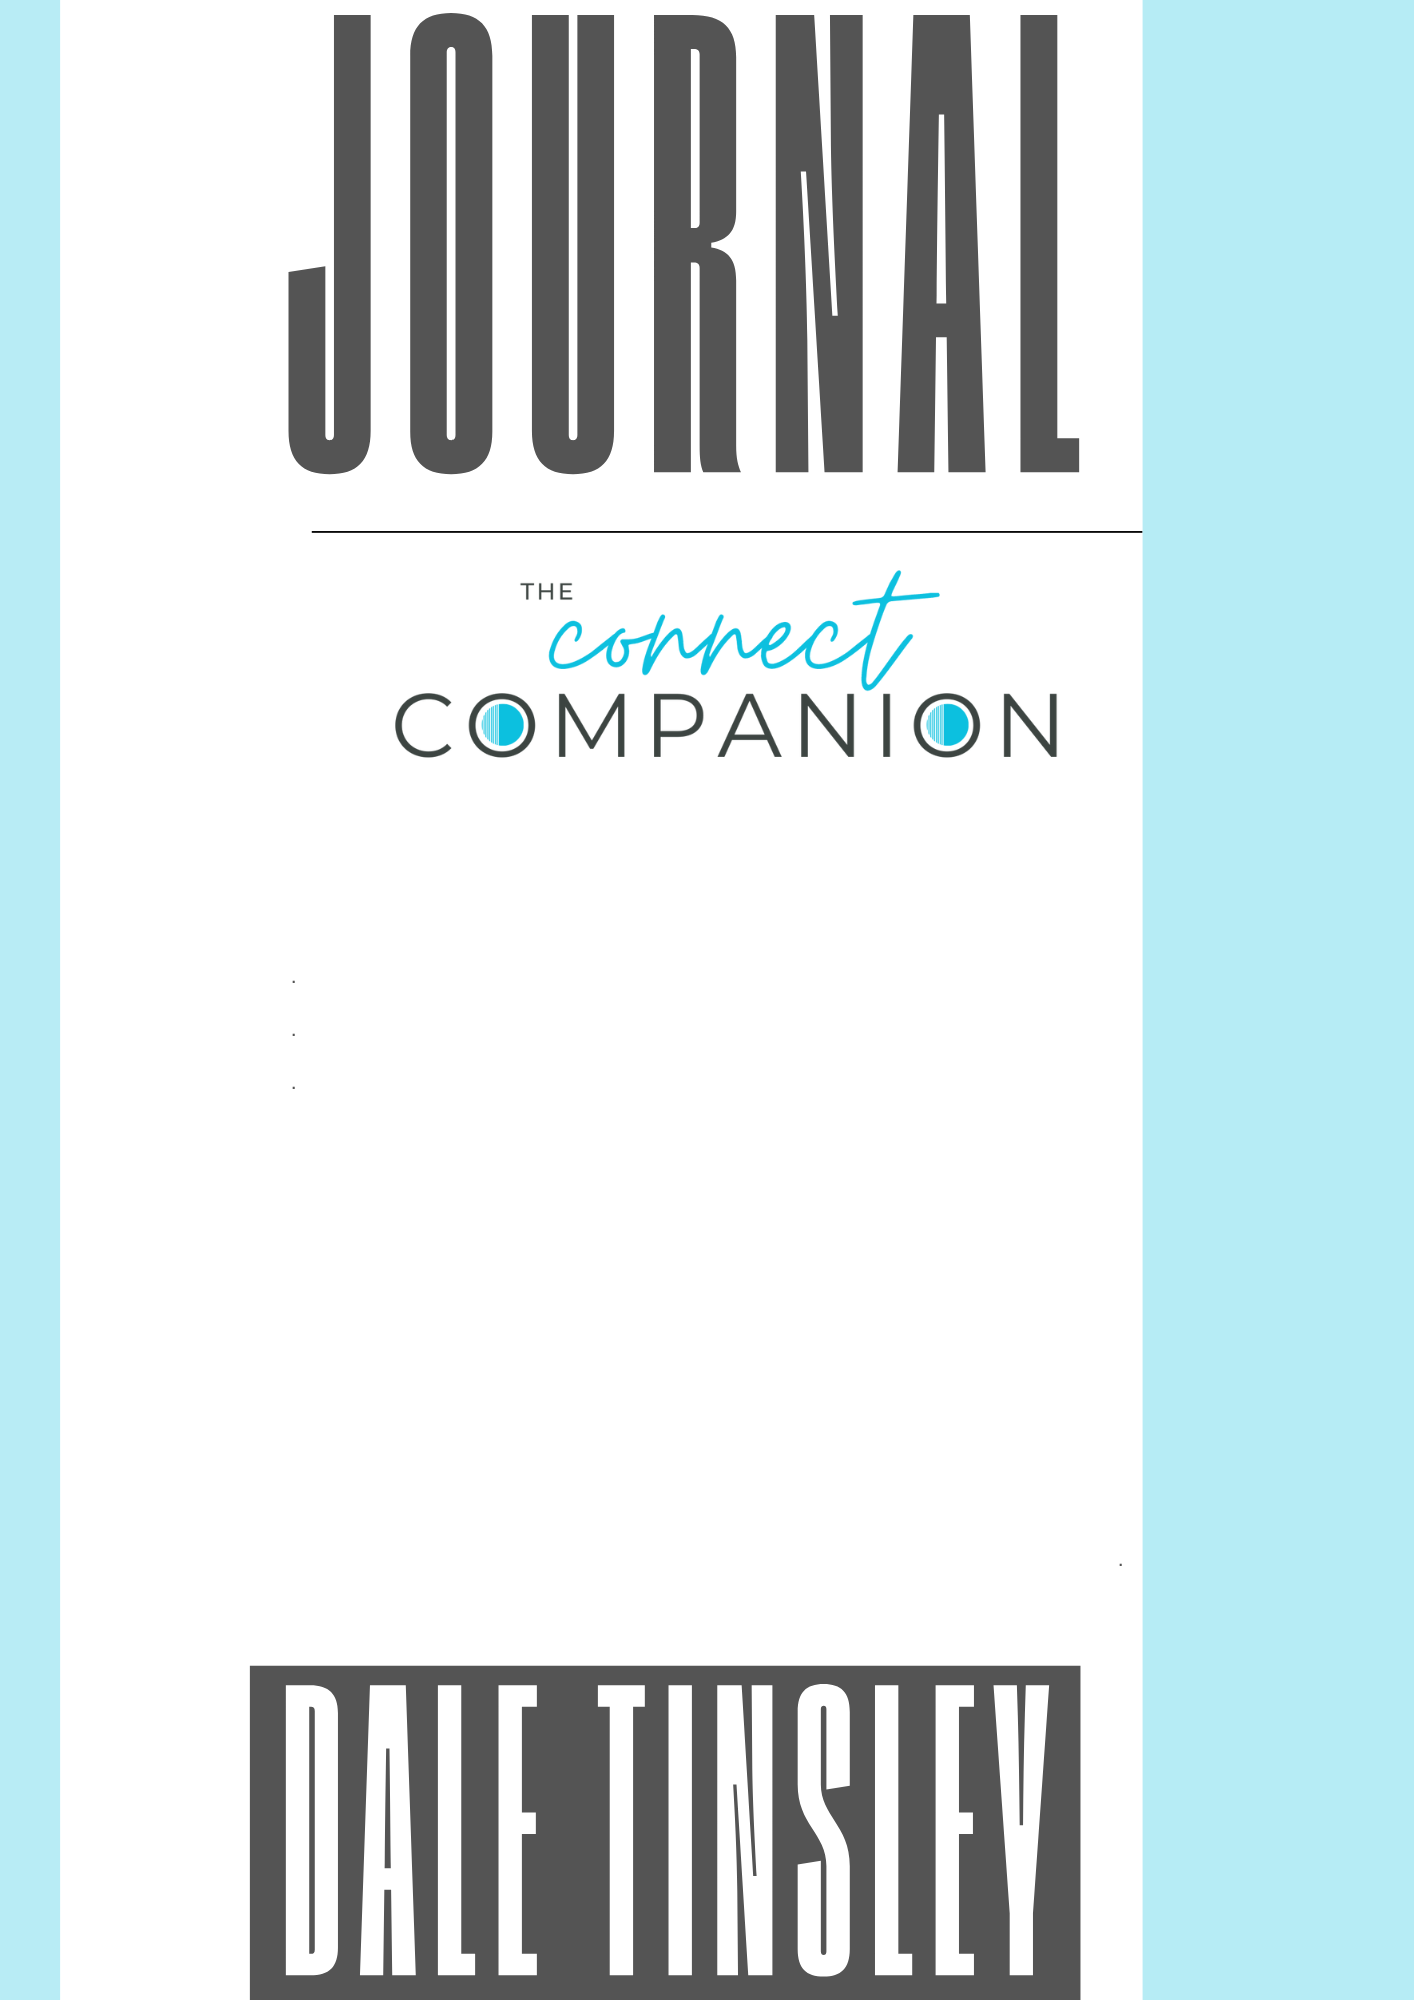 The Connect Companion Journal - Episode 1